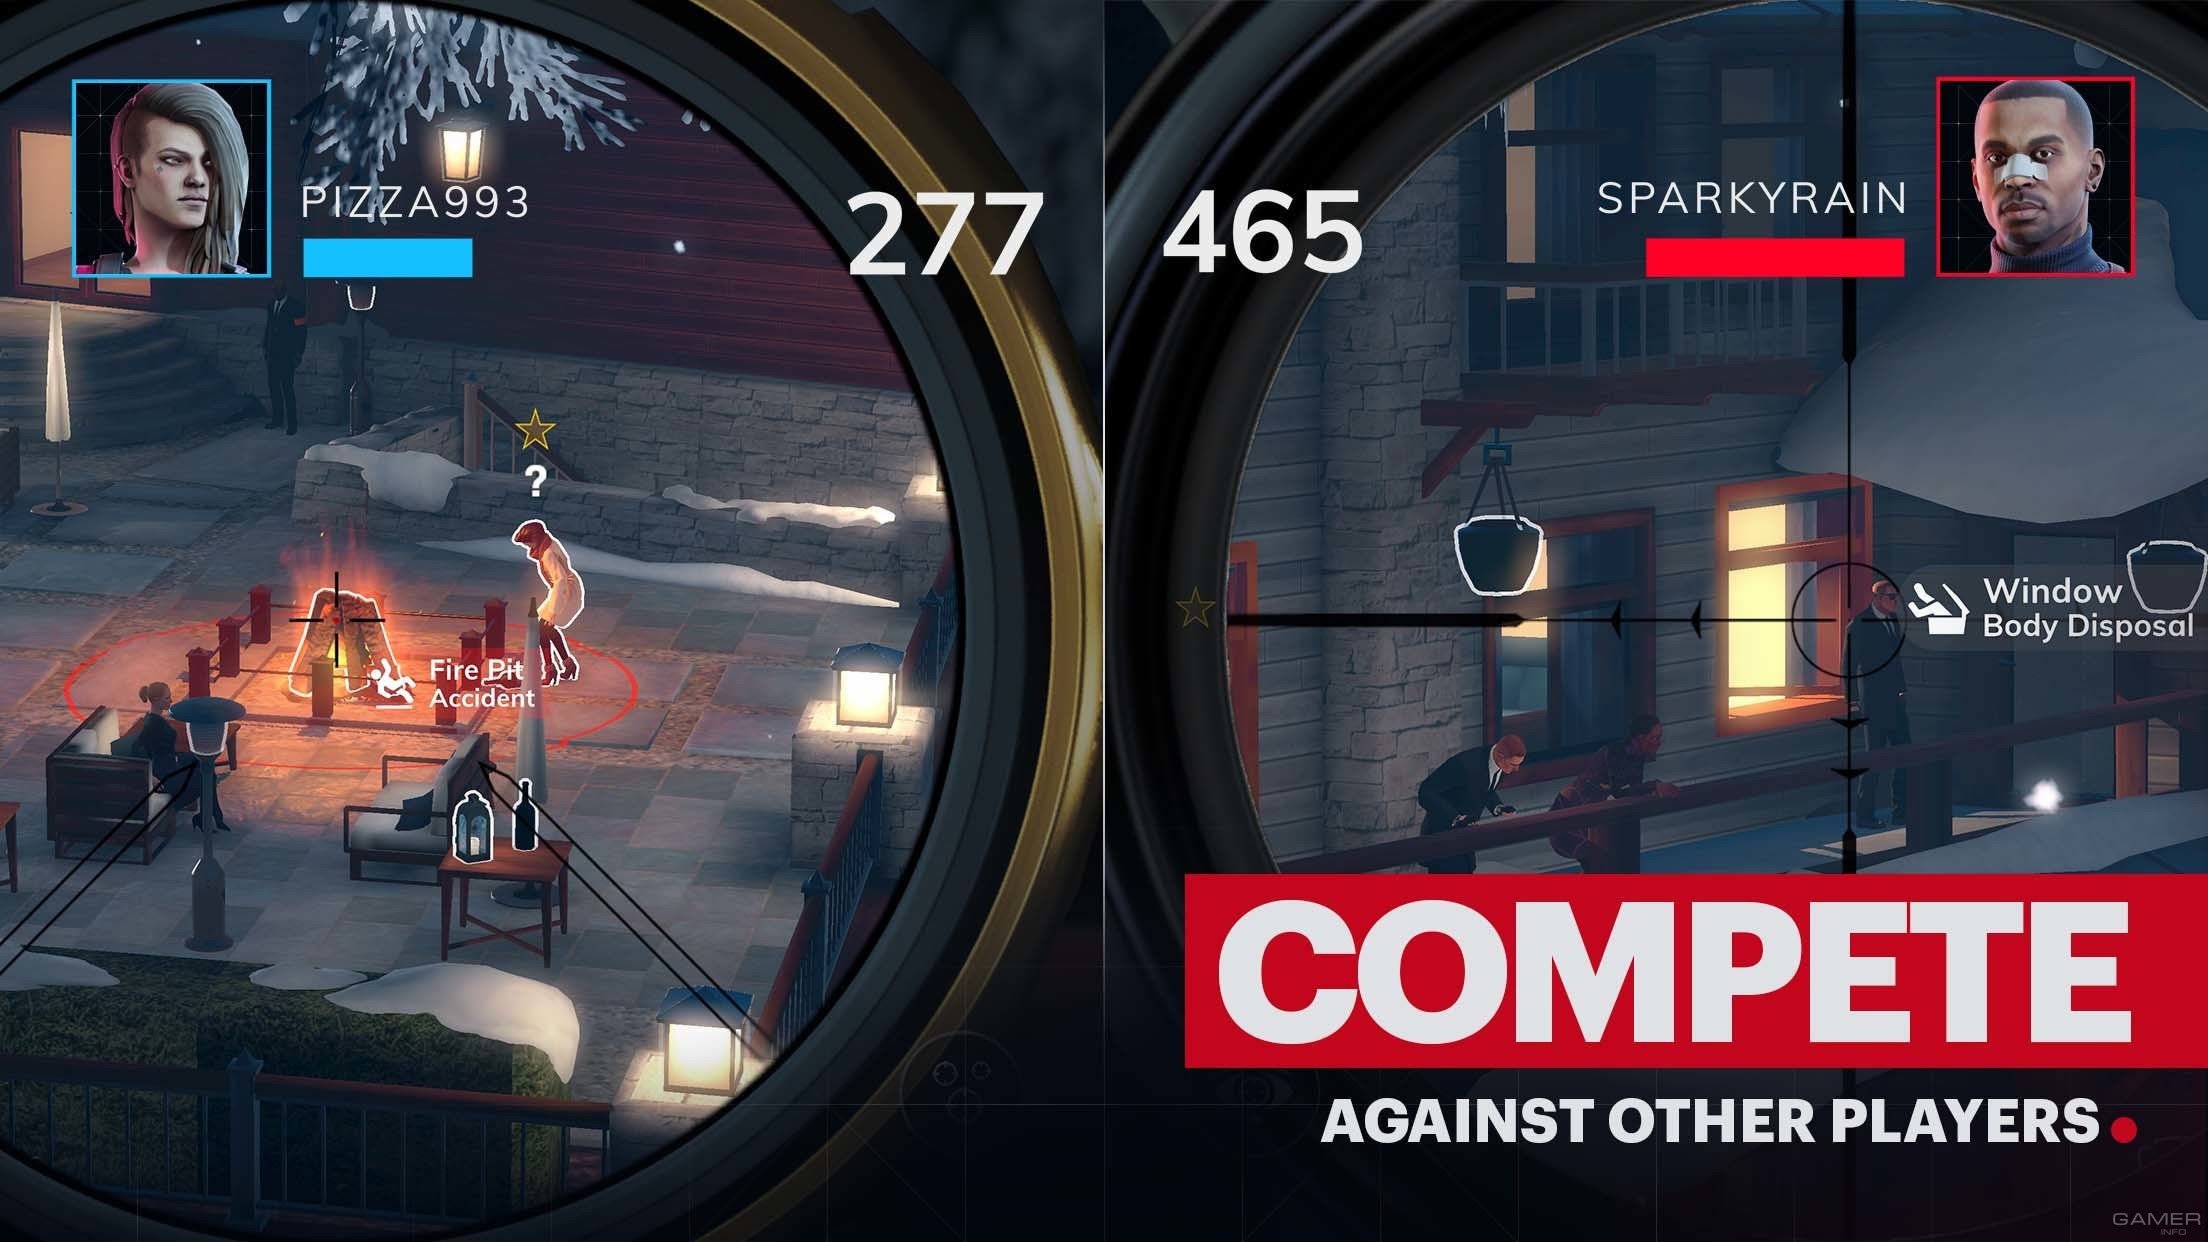 download hitman sniper the shadows apk for free